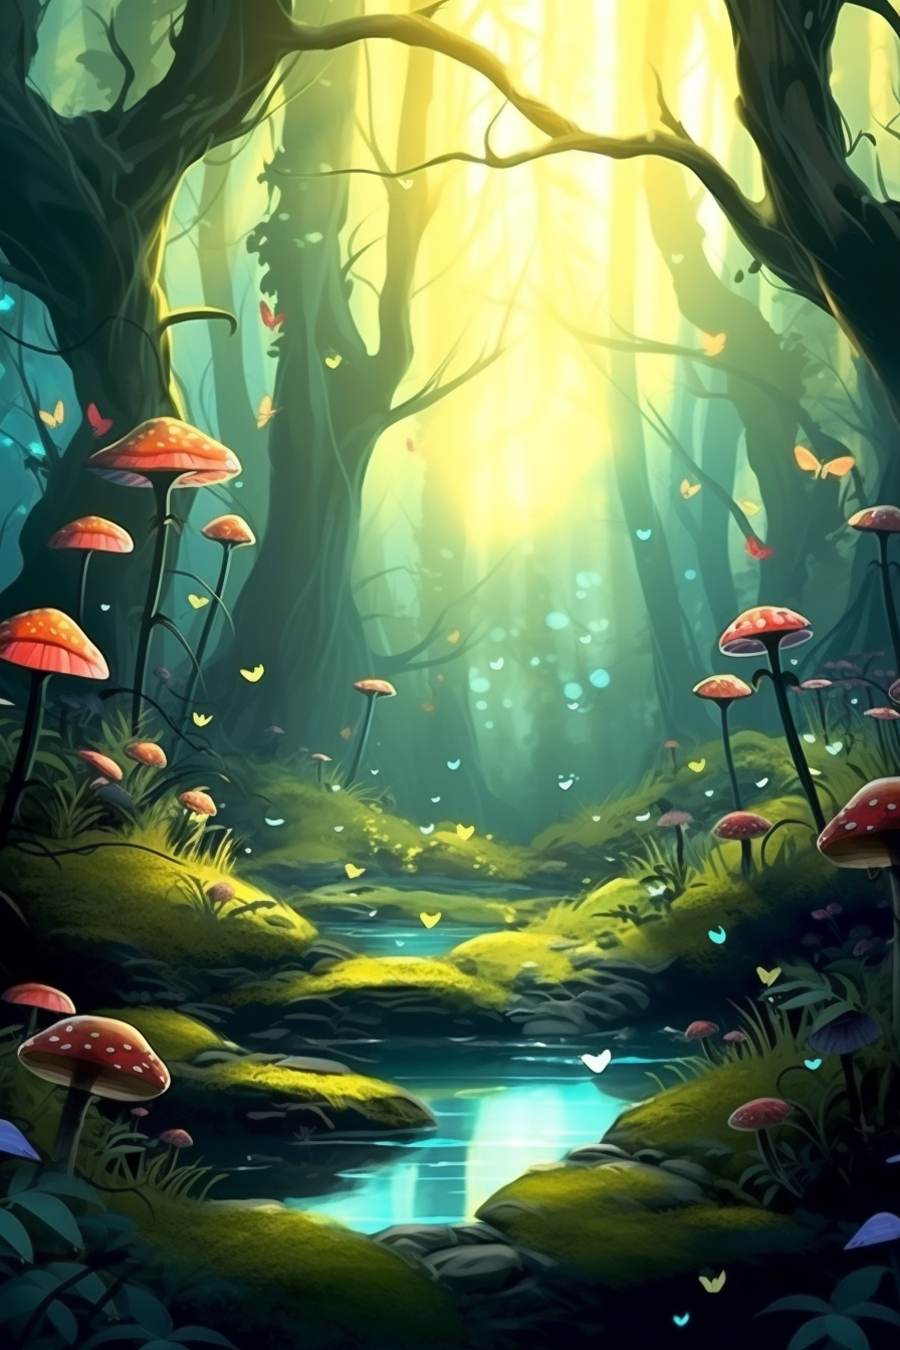 An illustration of a forest with mushrooms and a stream.